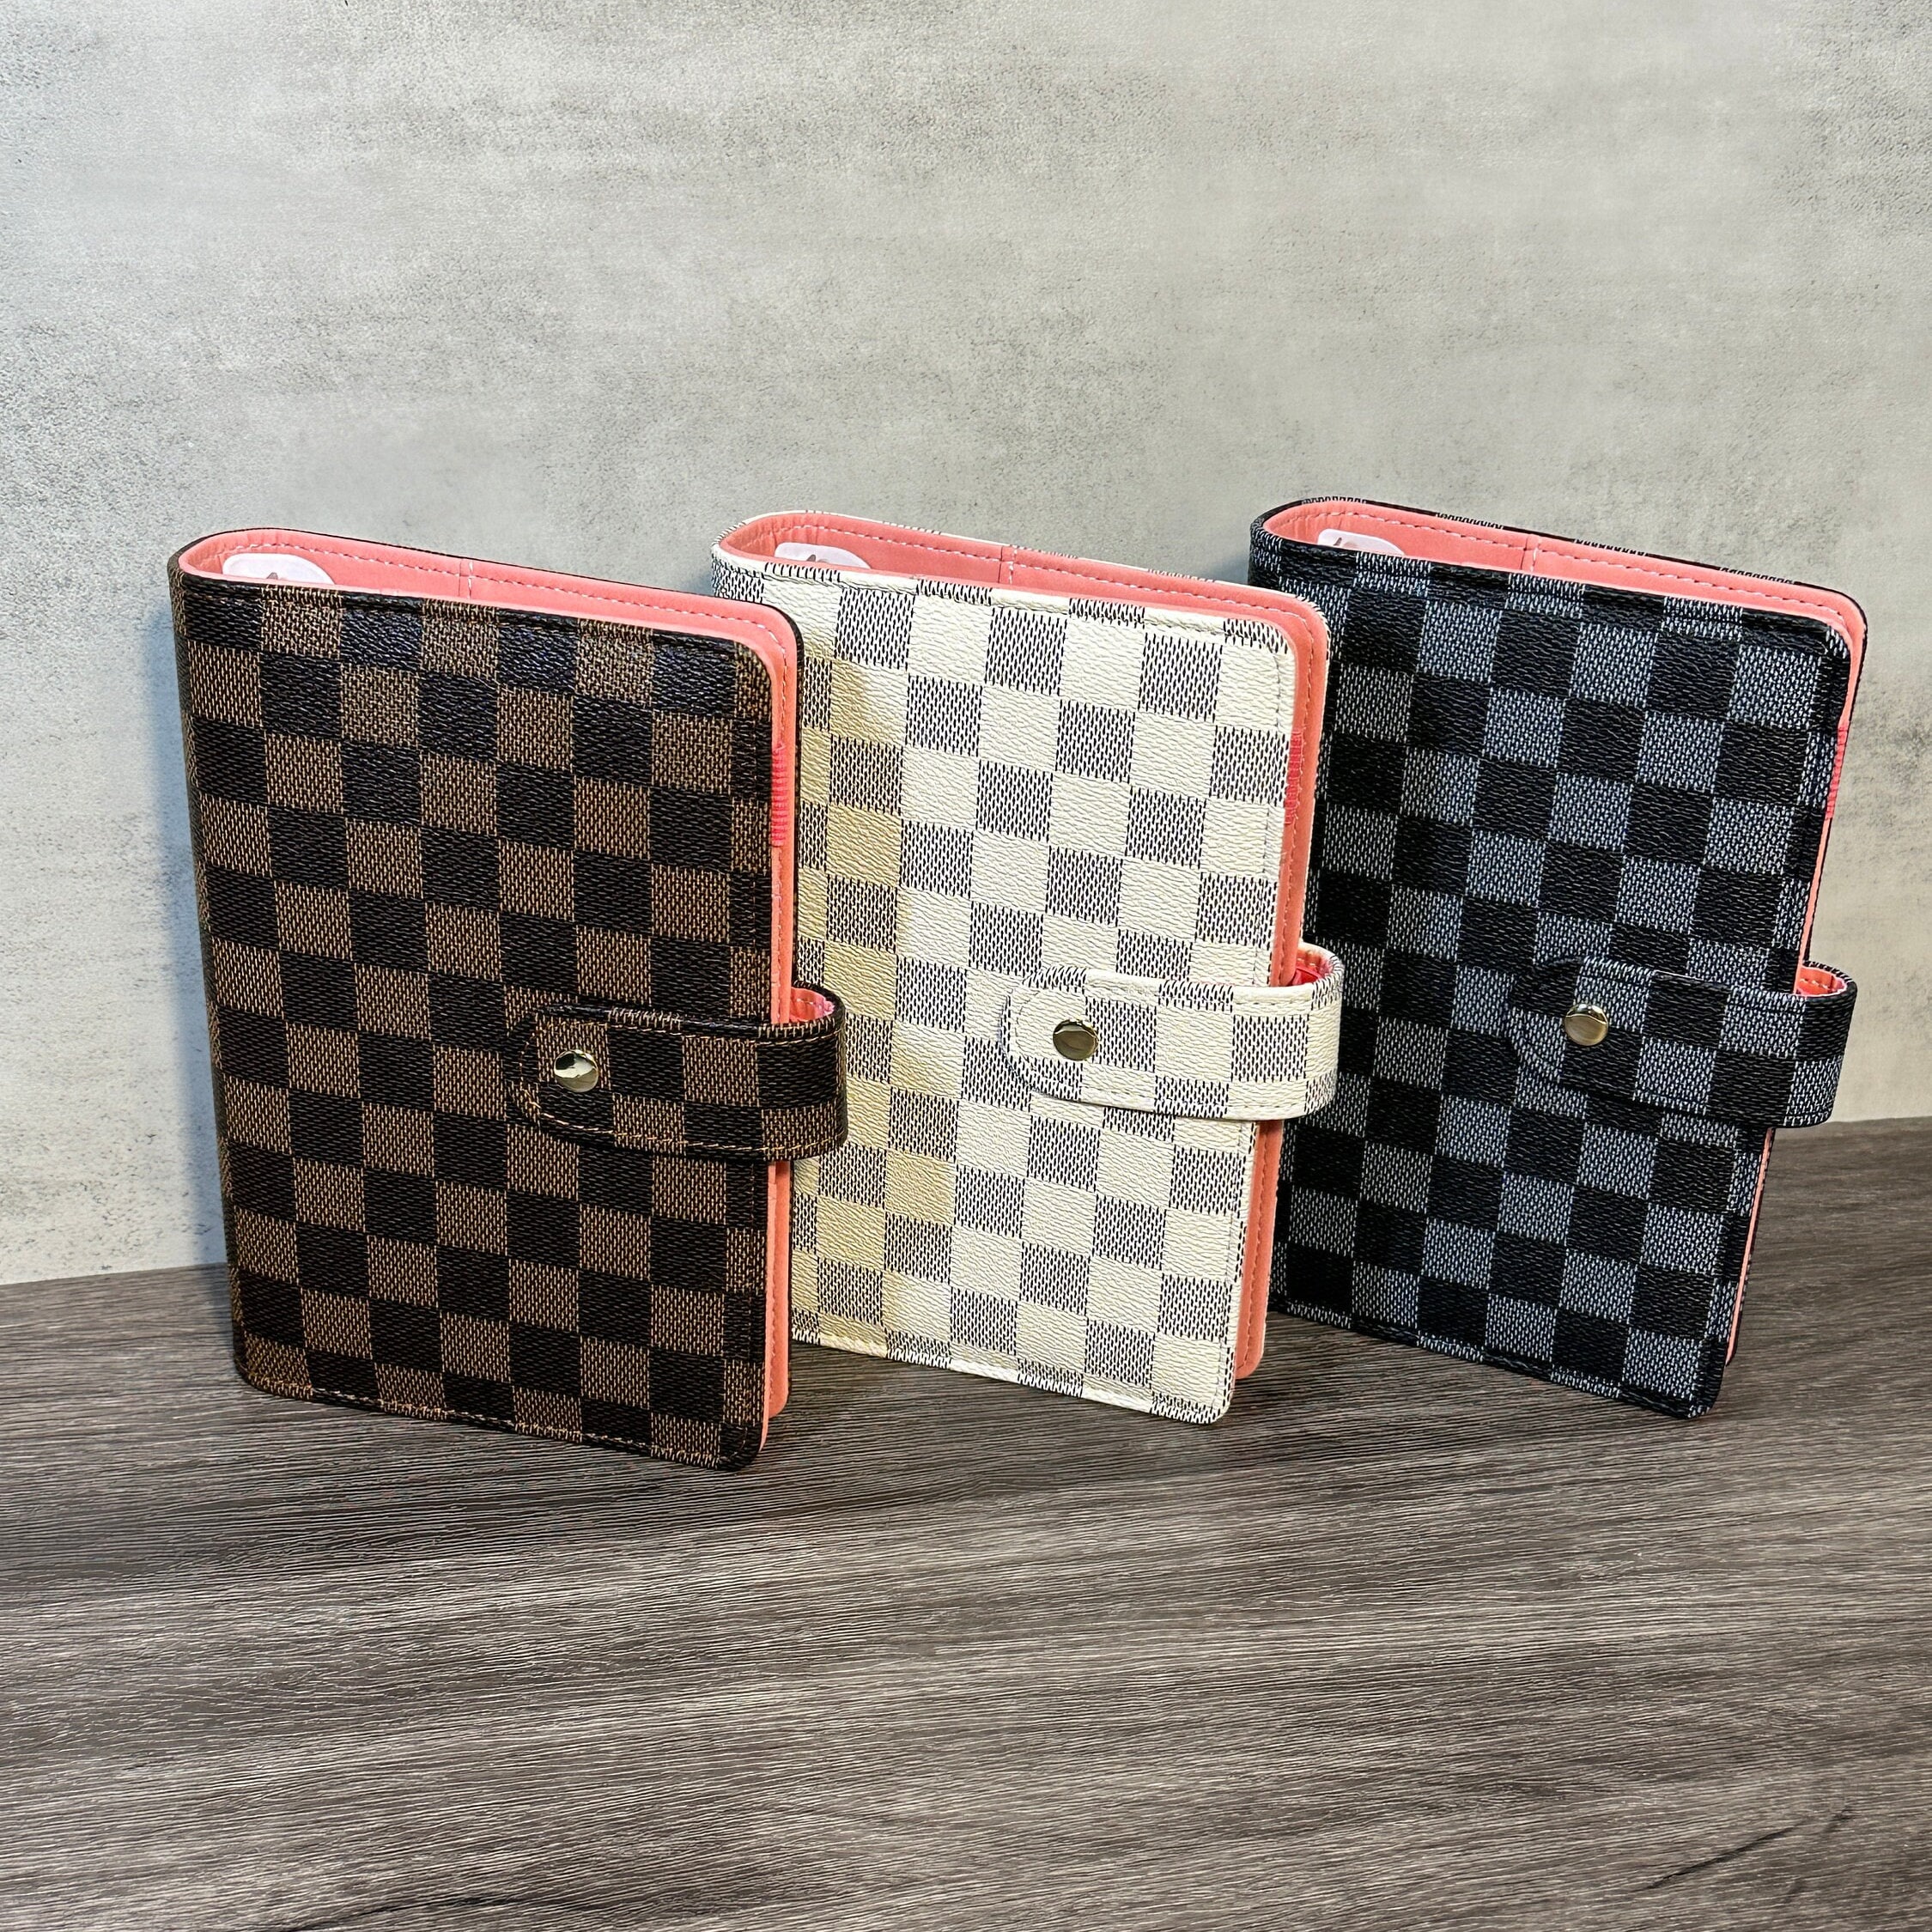 A6 Checkered Binders for Cash Budgeting Sinking Funds Cash 